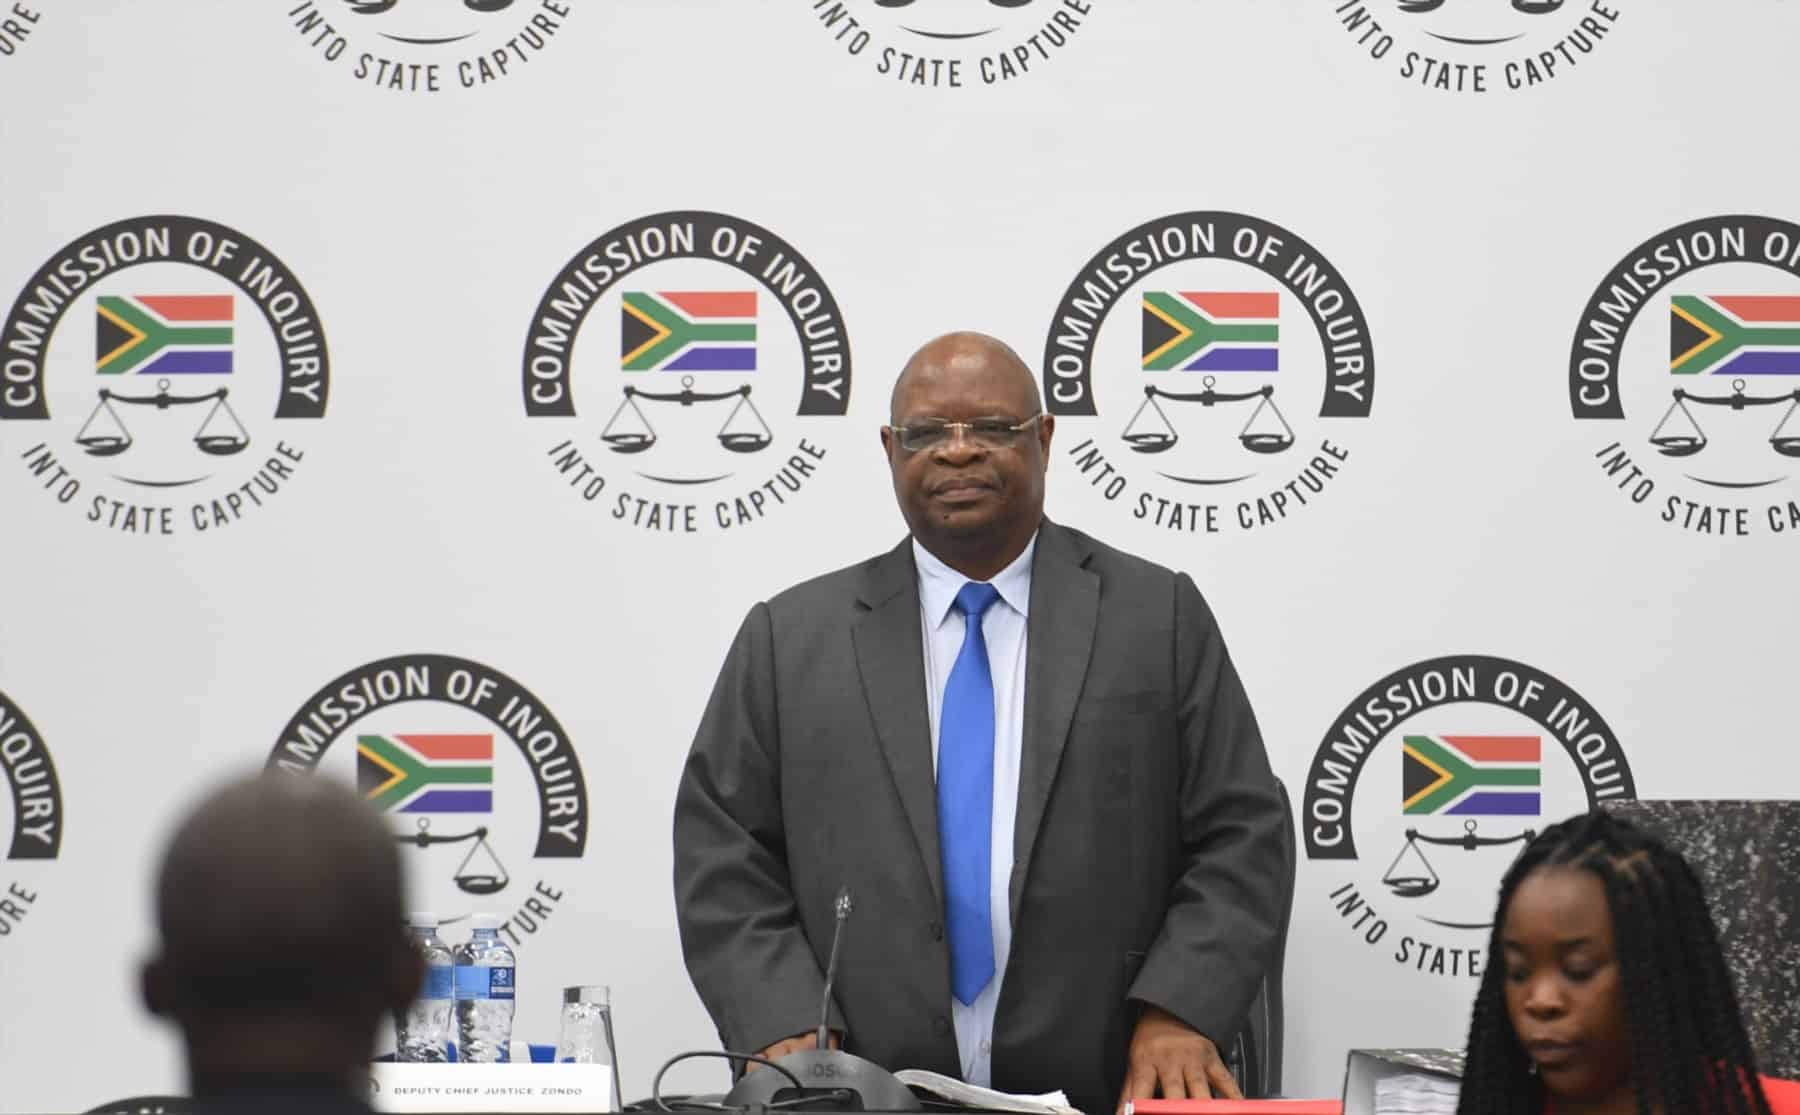 State Capture inquiry: Live stream, Monday 4 March 2019